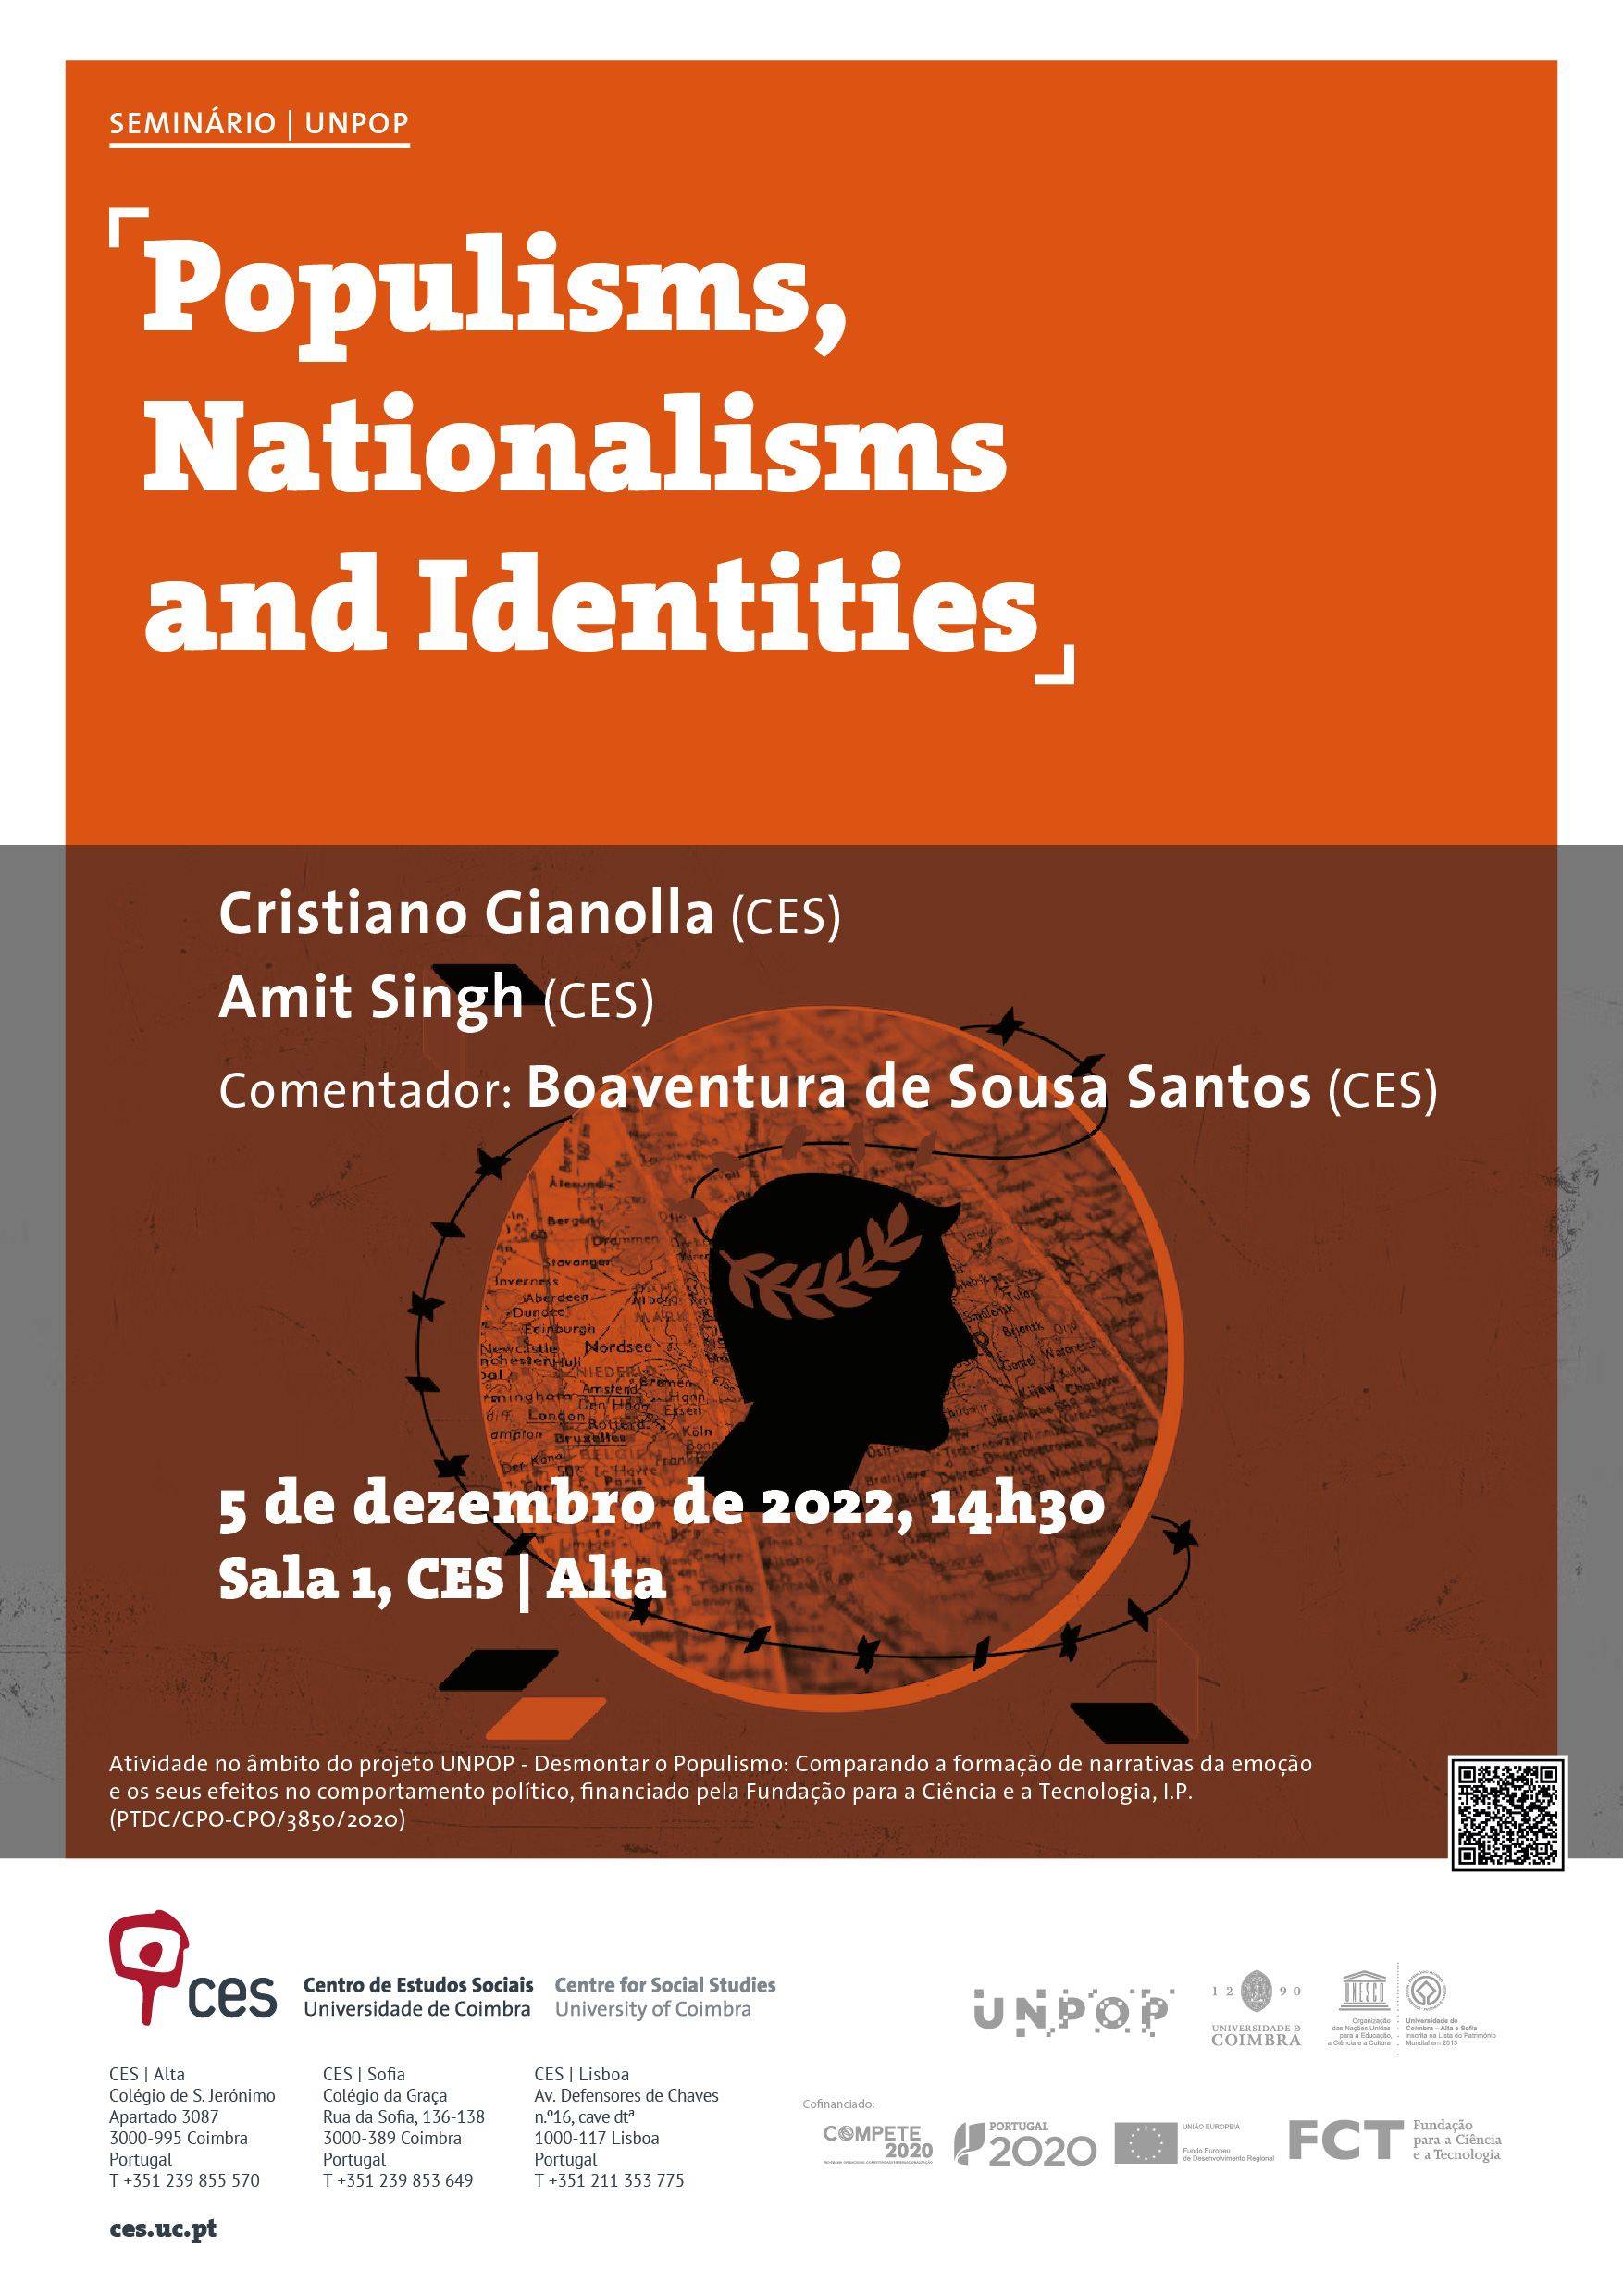 Populisms, Nationalisms and Identities <span id="edit_41104"><script>$(function() { $('#edit_41104').load( "/myces/user/editobj.php?tipo=evento&id=41104" ); });</script></span>